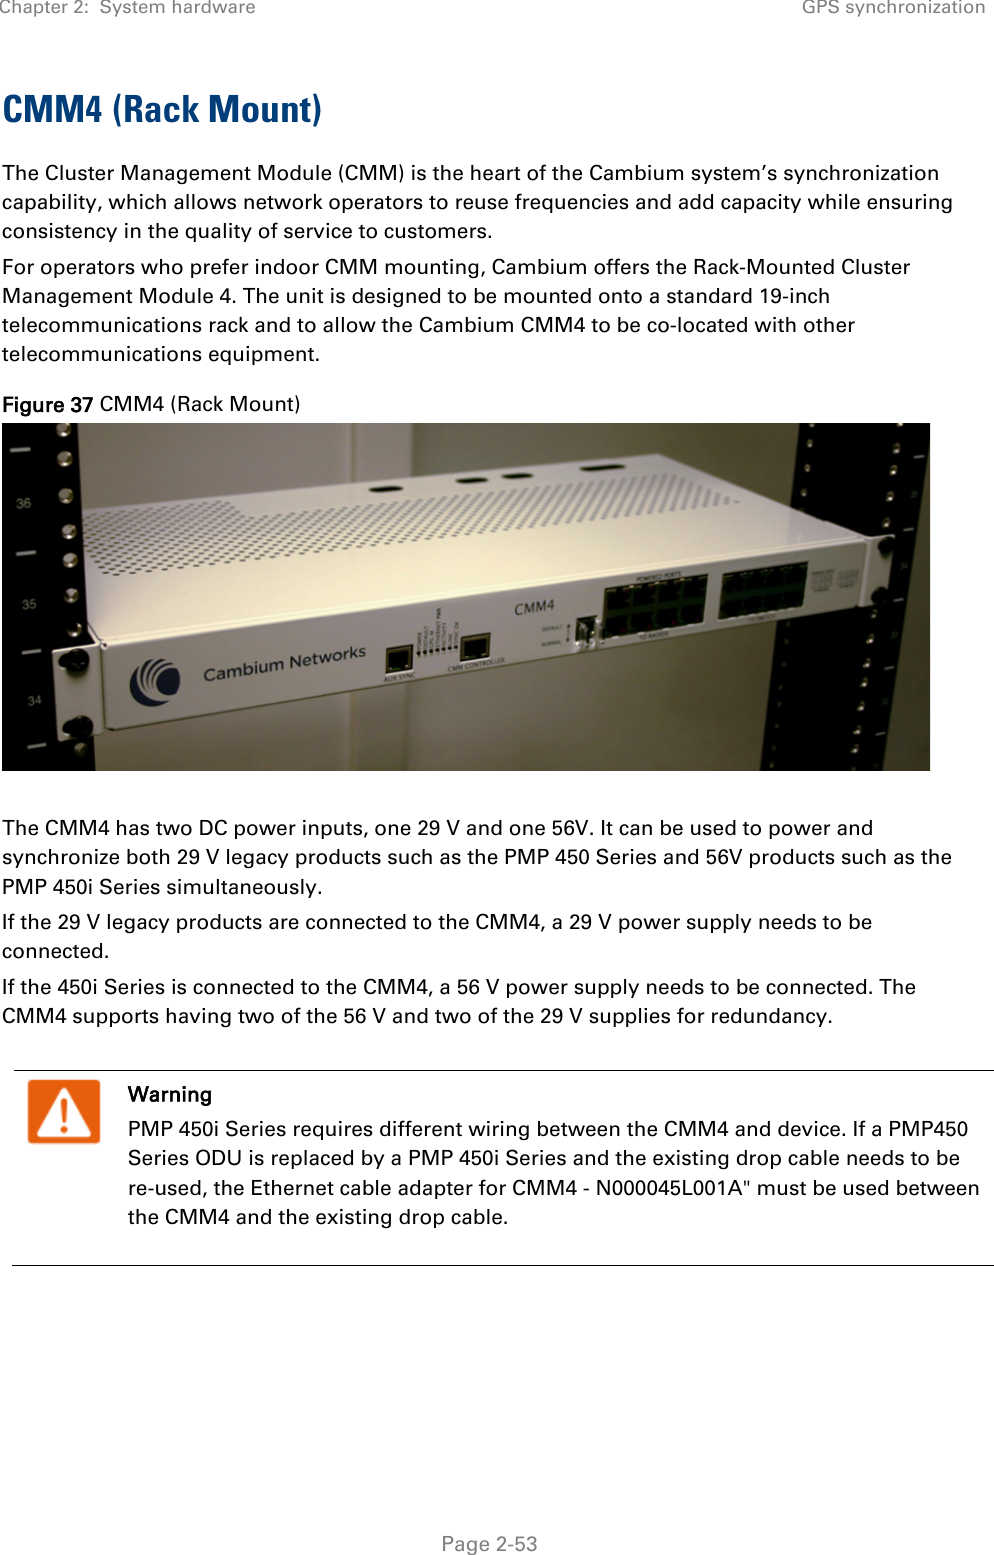 Chapter 2:  System hardware GPS synchronization   Page 2-53 CMM4 (Rack Mount) The Cluster Management Module (CMM) is the heart of the Cambium system’s synchronization capability, which allows network operators to reuse frequencies and add capacity while ensuring consistency in the quality of service to customers.  For operators who prefer indoor CMM mounting, Cambium offers the Rack-Mounted Cluster Management Module 4. The unit is designed to be mounted onto a standard 19-inch telecommunications rack and to allow the Cambium CMM4 to be co-located with other telecommunications equipment. Figure 37 CMM4 (Rack Mount)   The CMM4 has two DC power inputs, one 29 V and one 56V. It can be used to power and synchronize both 29 V legacy products such as the PMP 450 Series and 56V products such as the PMP 450i Series simultaneously. If the 29 V legacy products are connected to the CMM4, a 29 V power supply needs to be connected.  If the 450i Series is connected to the CMM4, a 56 V power supply needs to be connected. The CMM4 supports having two of the 56 V and two of the 29 V supplies for redundancy.    Warning PMP 450i Series requires different wiring between the CMM4 and device. If a PMP450 Series ODU is replaced by a PMP 450i Series and the existing drop cable needs to be re-used, the Ethernet cable adapter for CMM4 - N000045L001A&quot; must be used between the CMM4 and the existing drop cable. 